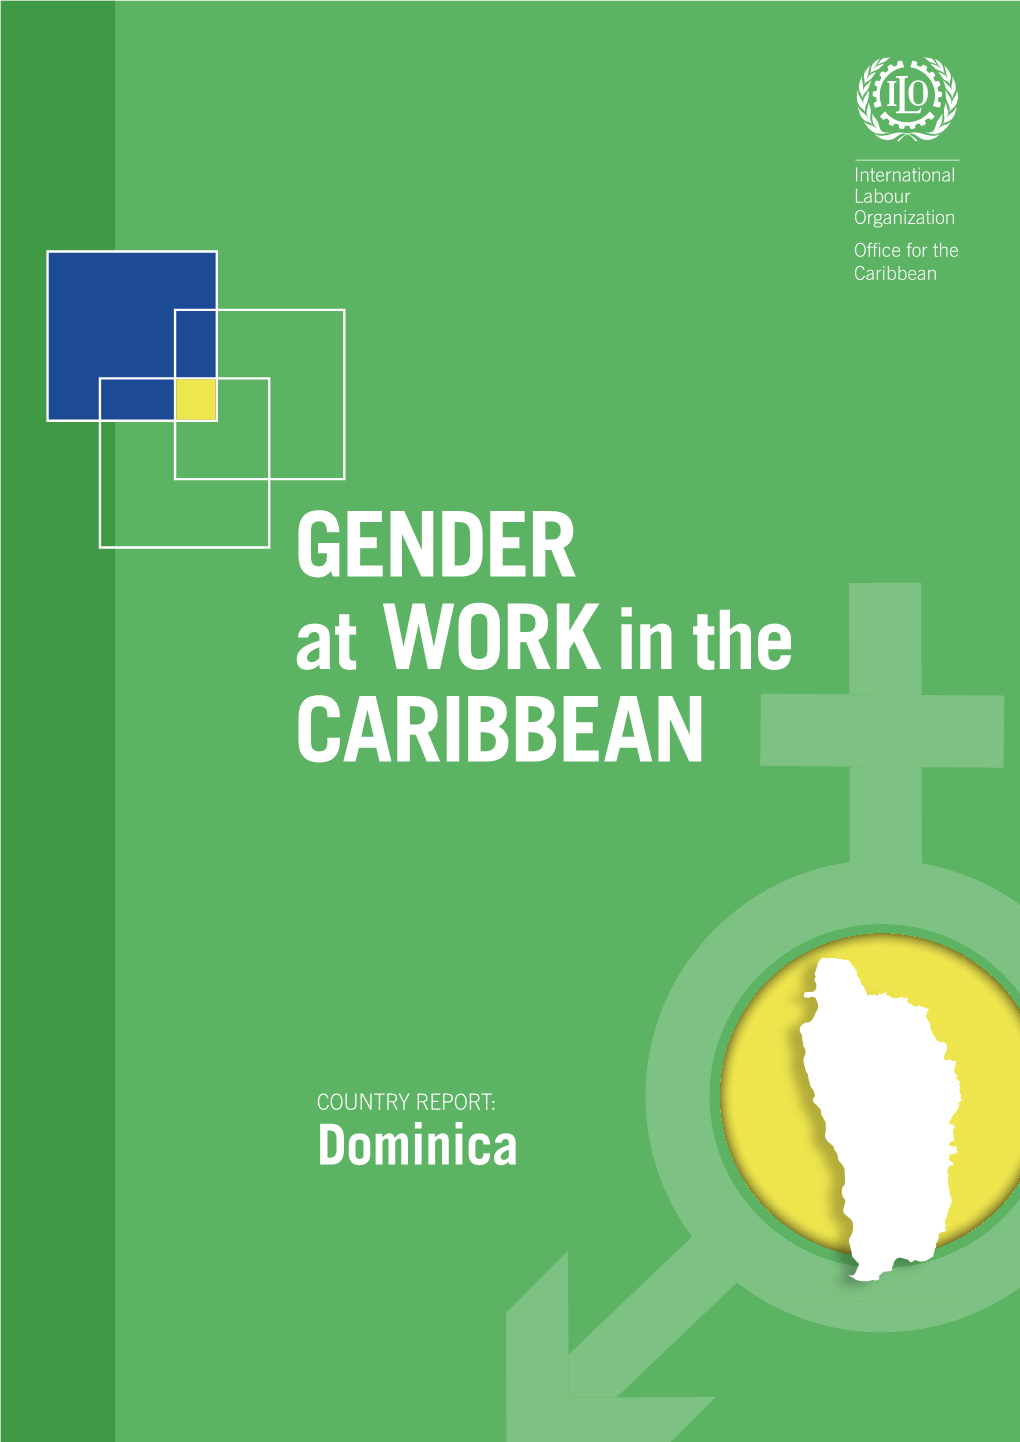 Gender at Work in the Caribbean: Country Report for Dominica